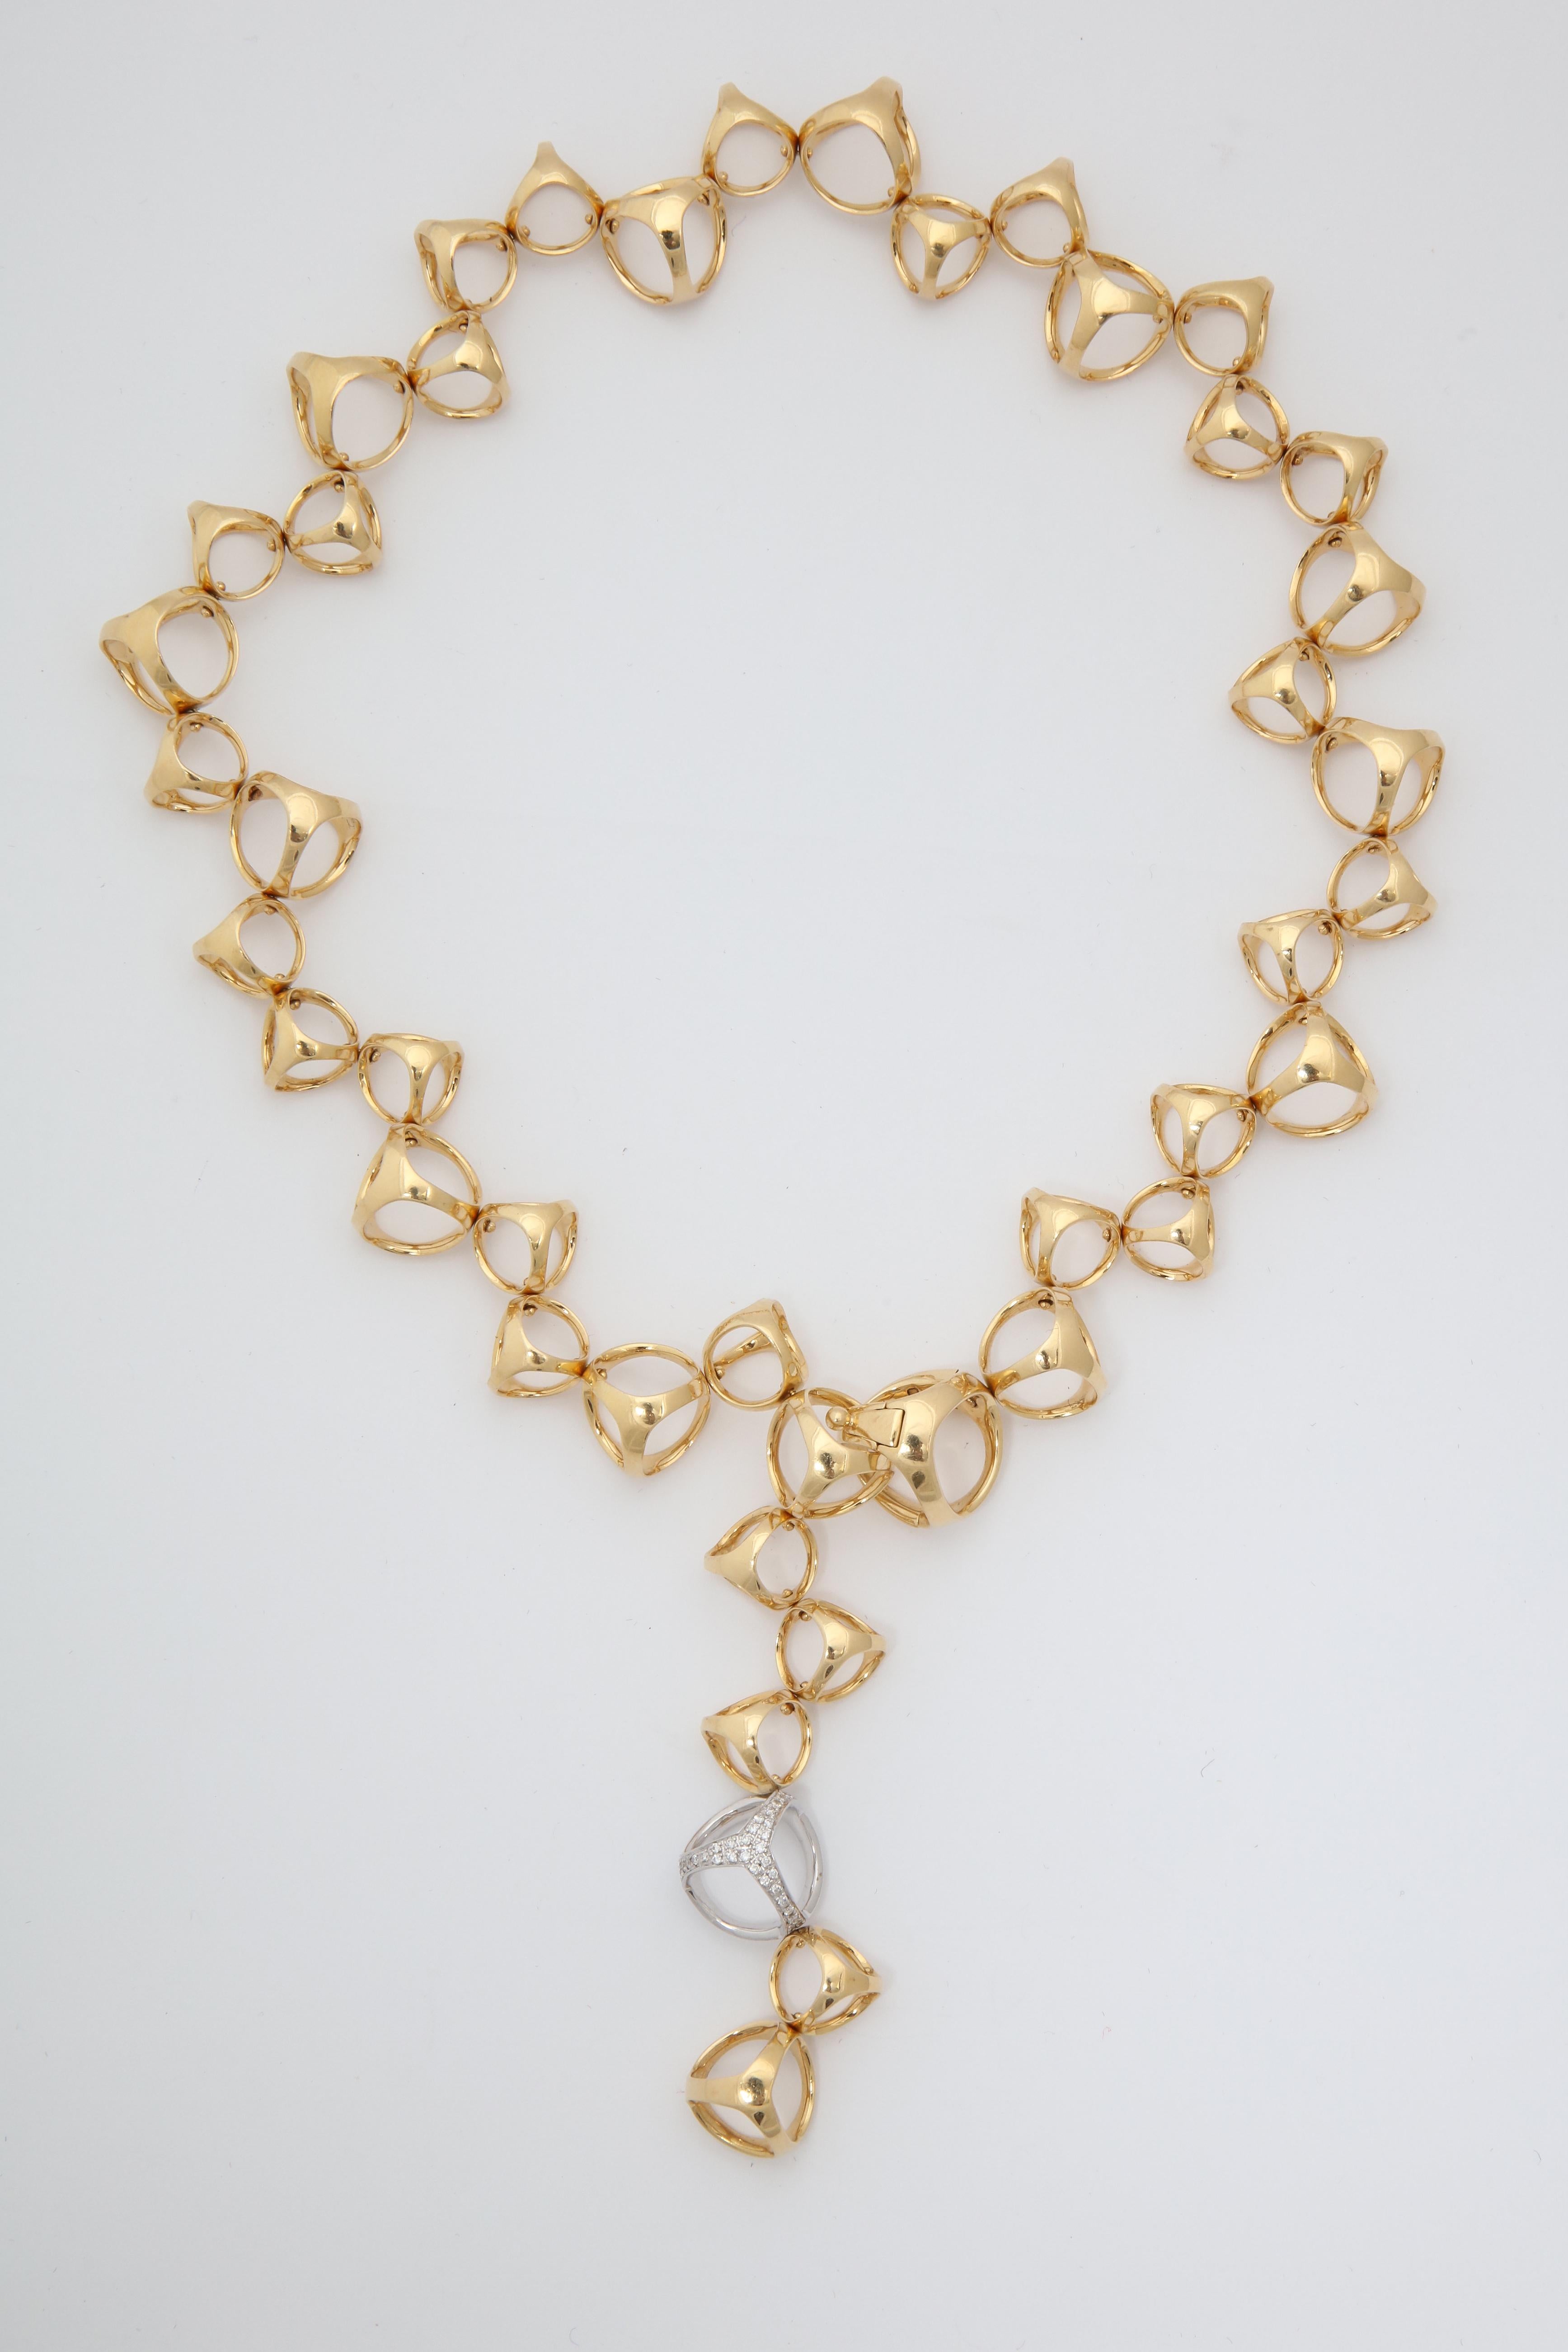 One Ladies 18kt Gold Open Link Necklace Composed Of Numerous Three Dimensional Triadra Style Links One Link In White Gold Set With Approximately .50 Cts Of Diamonds.Signed Di Modolo Milano.Original Retail Price $12,250-